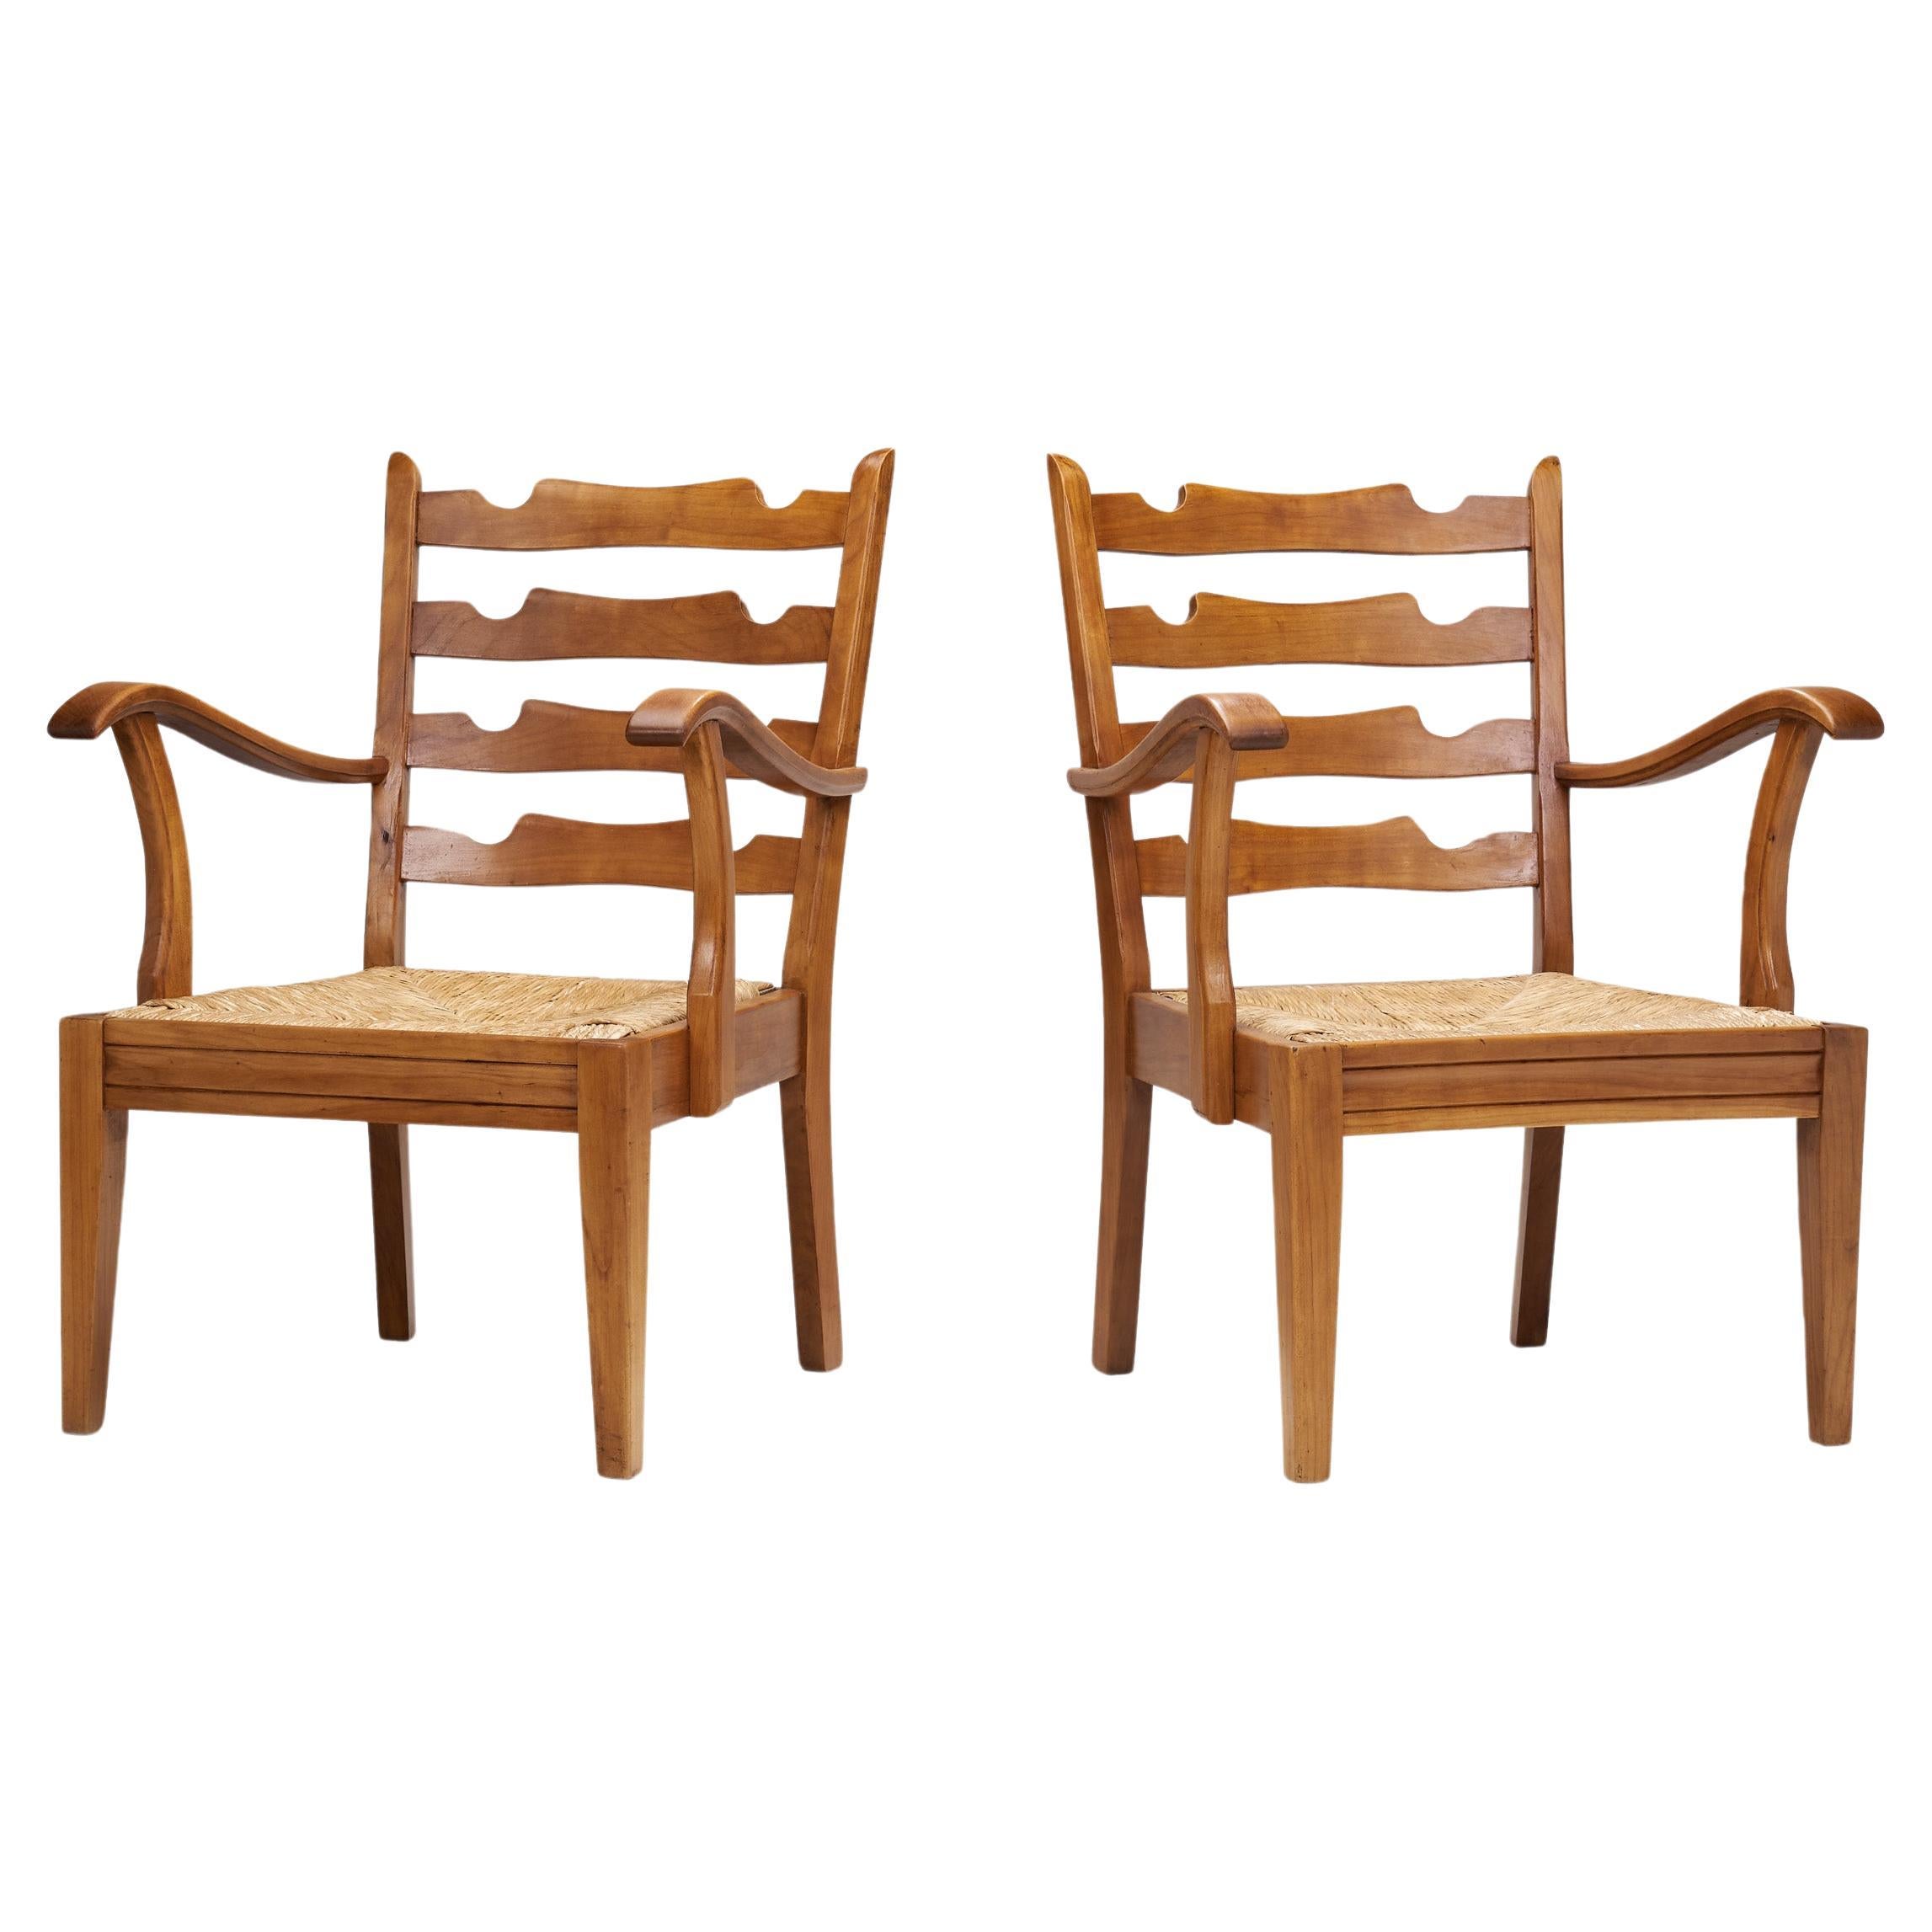 French Cherry Wood Chairs with Seats of Woven Papercord, France 1950s For Sale